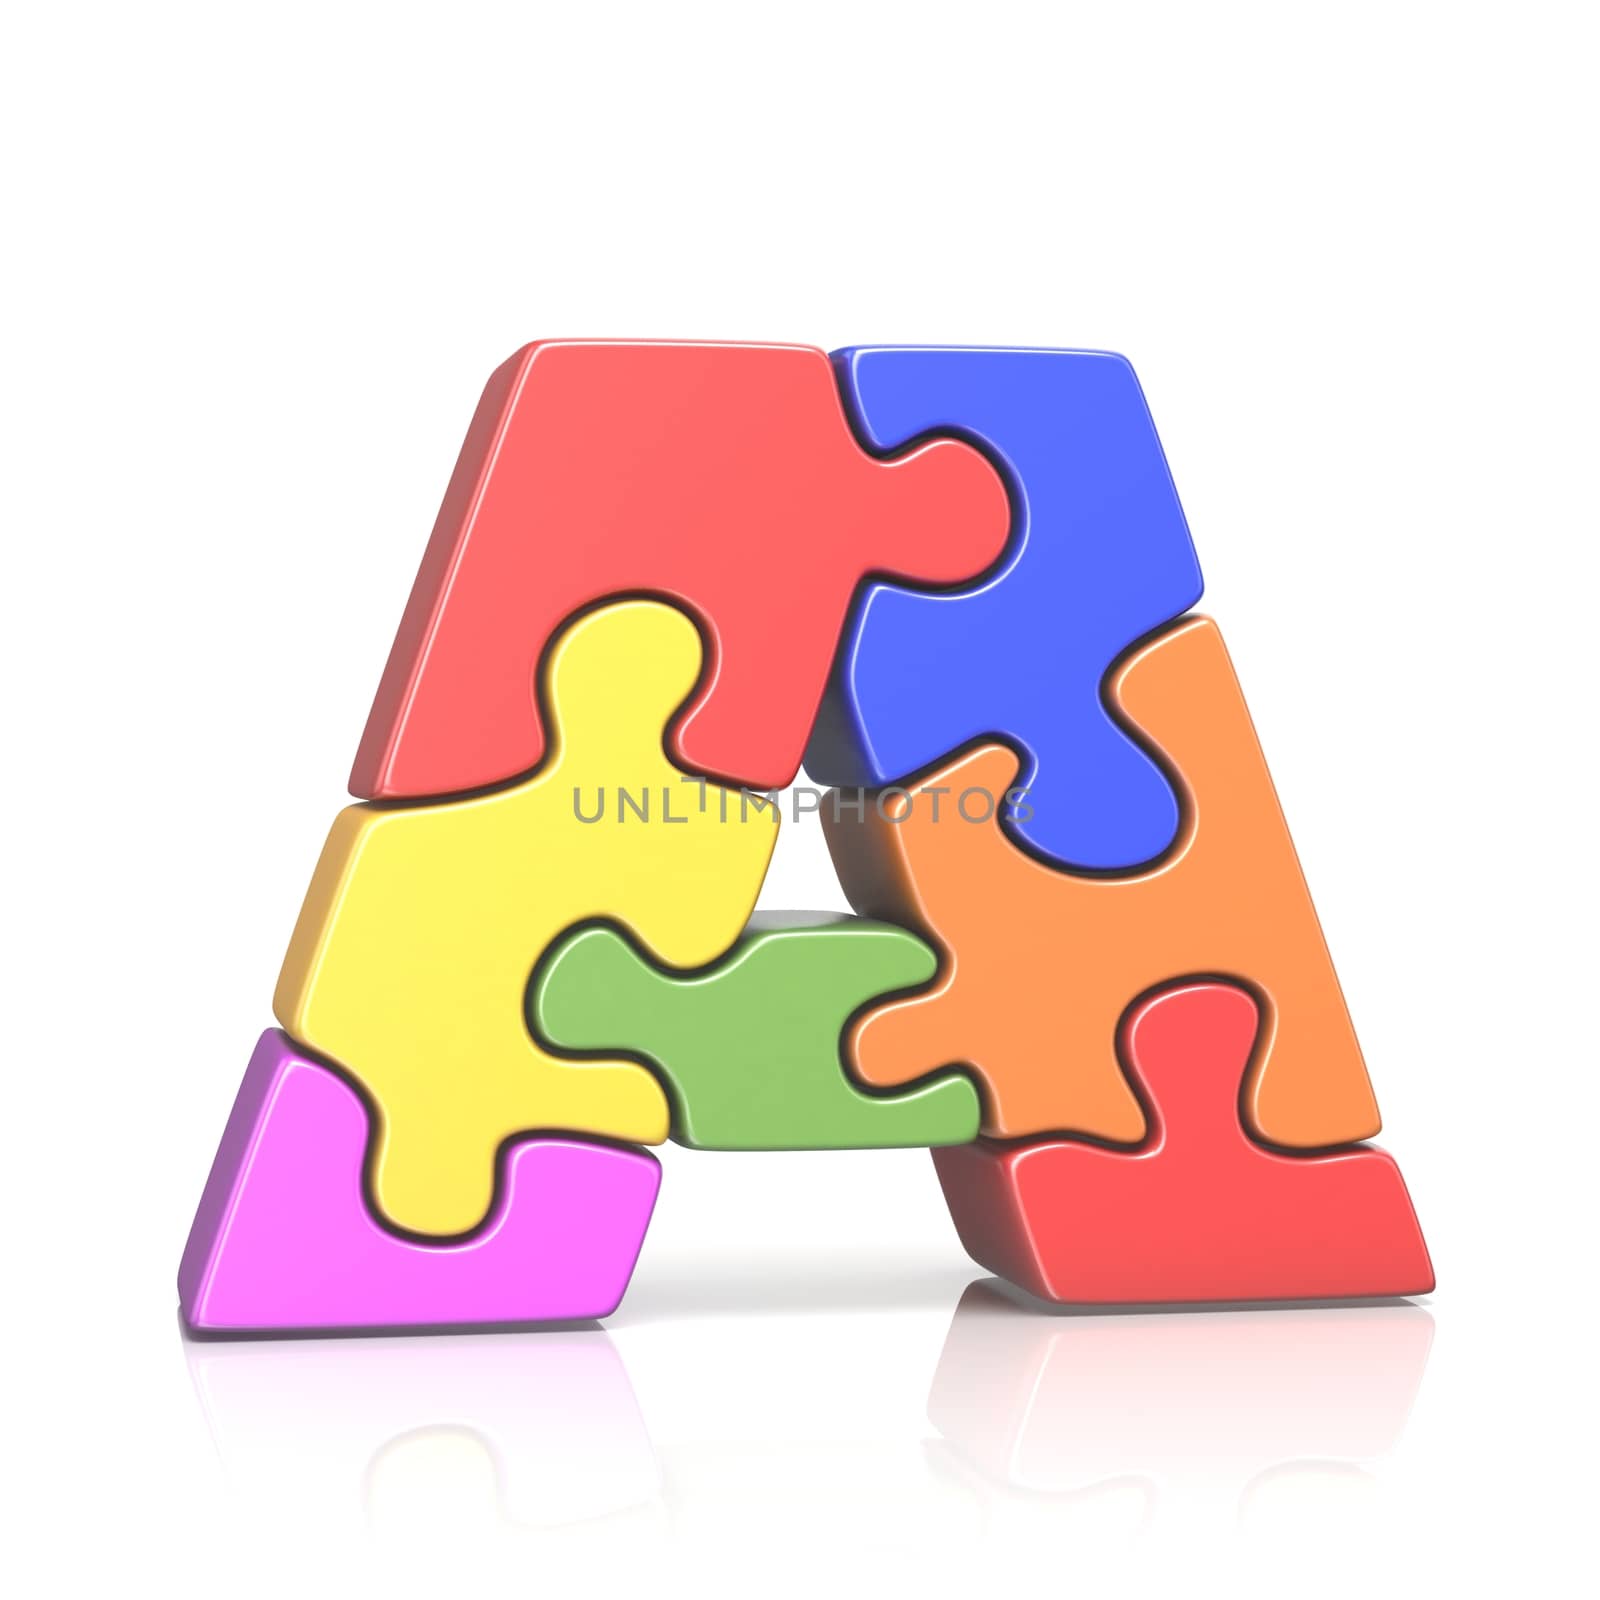 Puzzle jigsaw letter A 3D render illustration isolated on white background